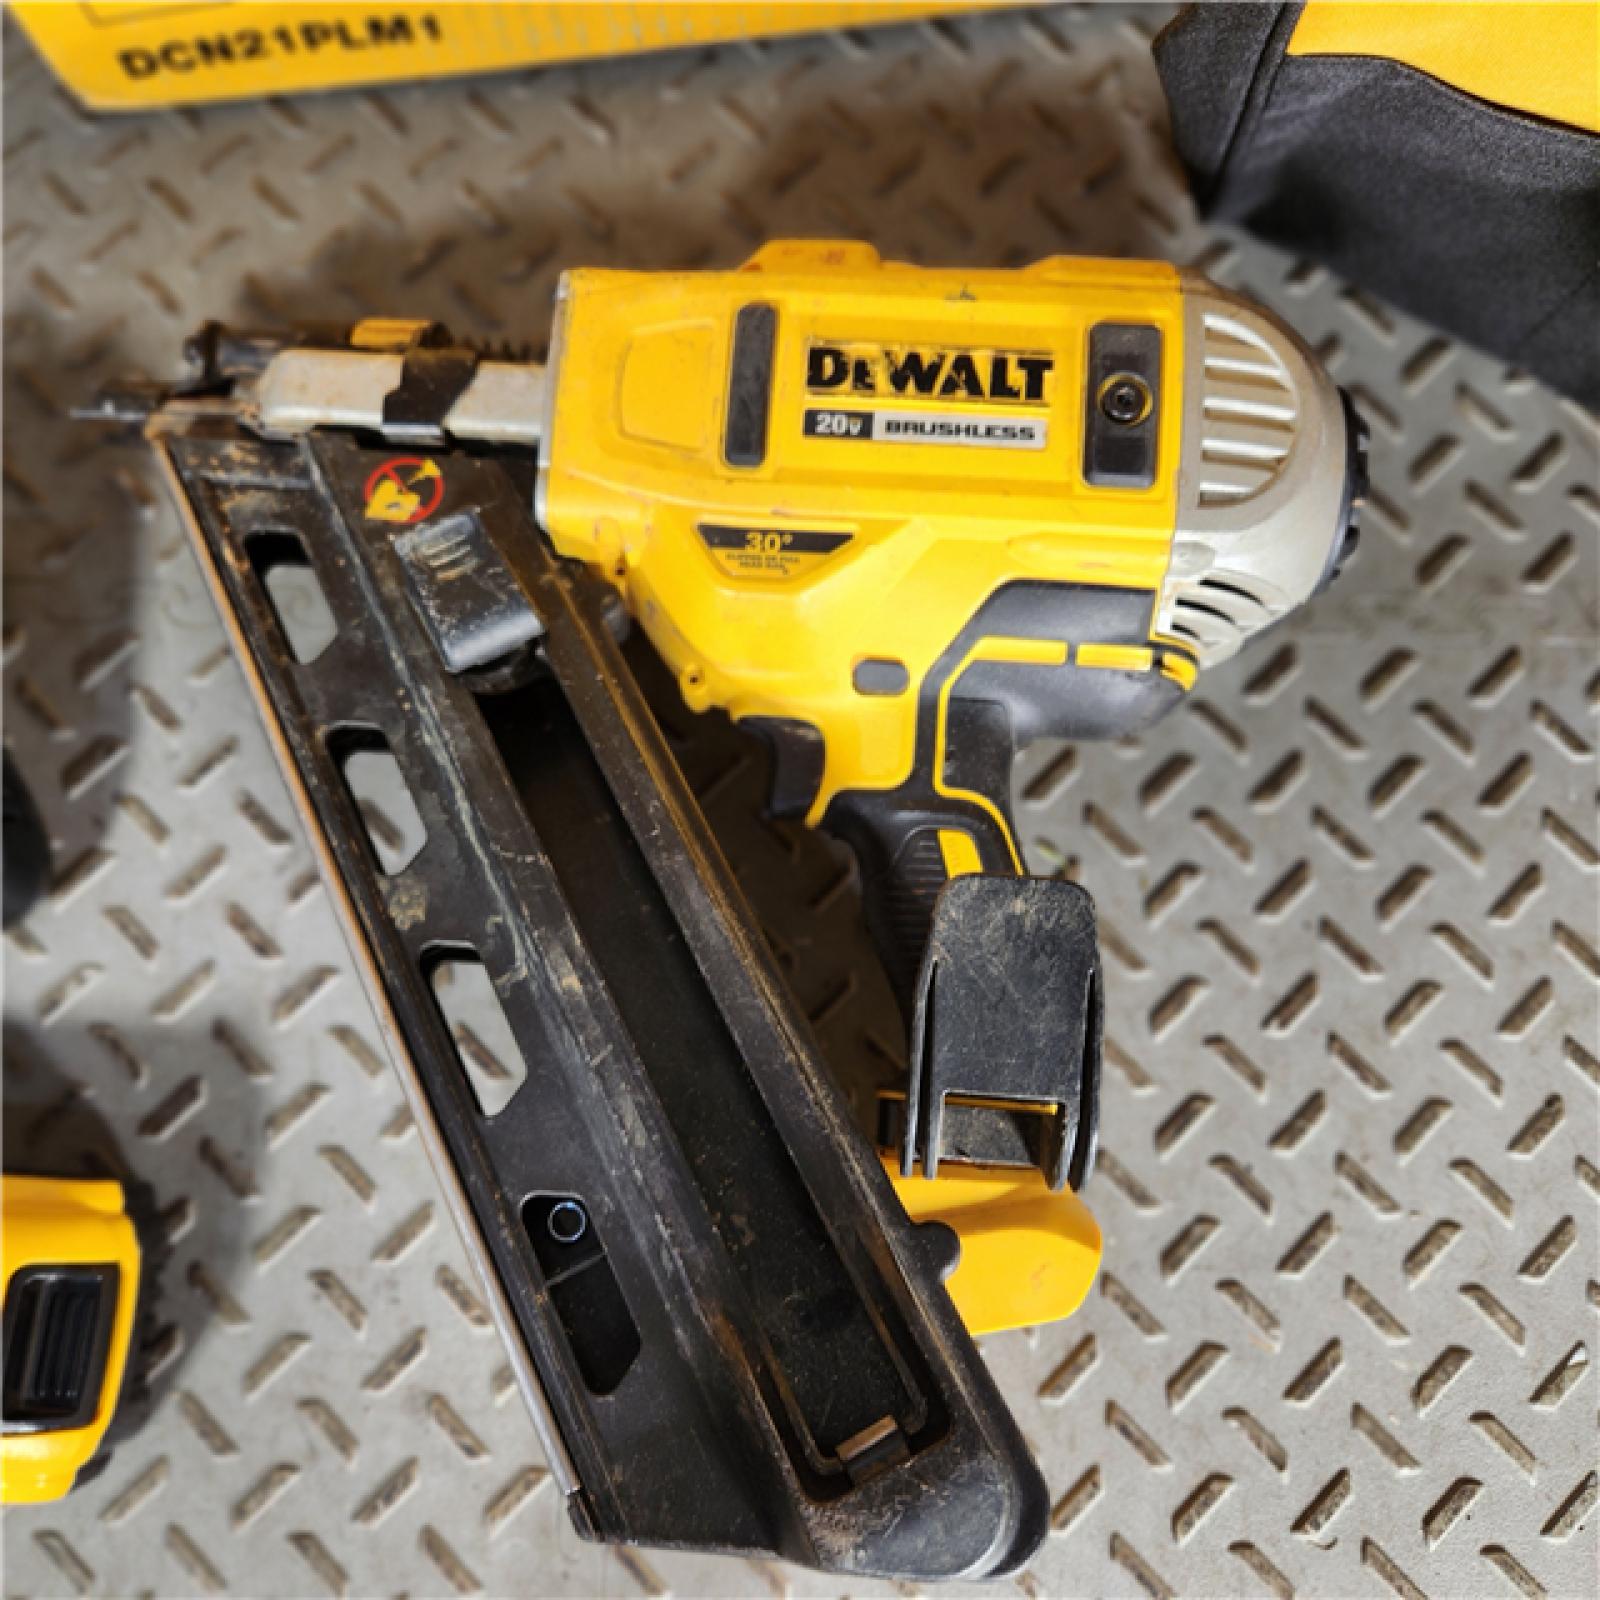 Houston location- AS-IS DeWalt 20V MAX Collated Cordless Framing Nailer Tool Kit with Rafter Hook (Appears in used condition)